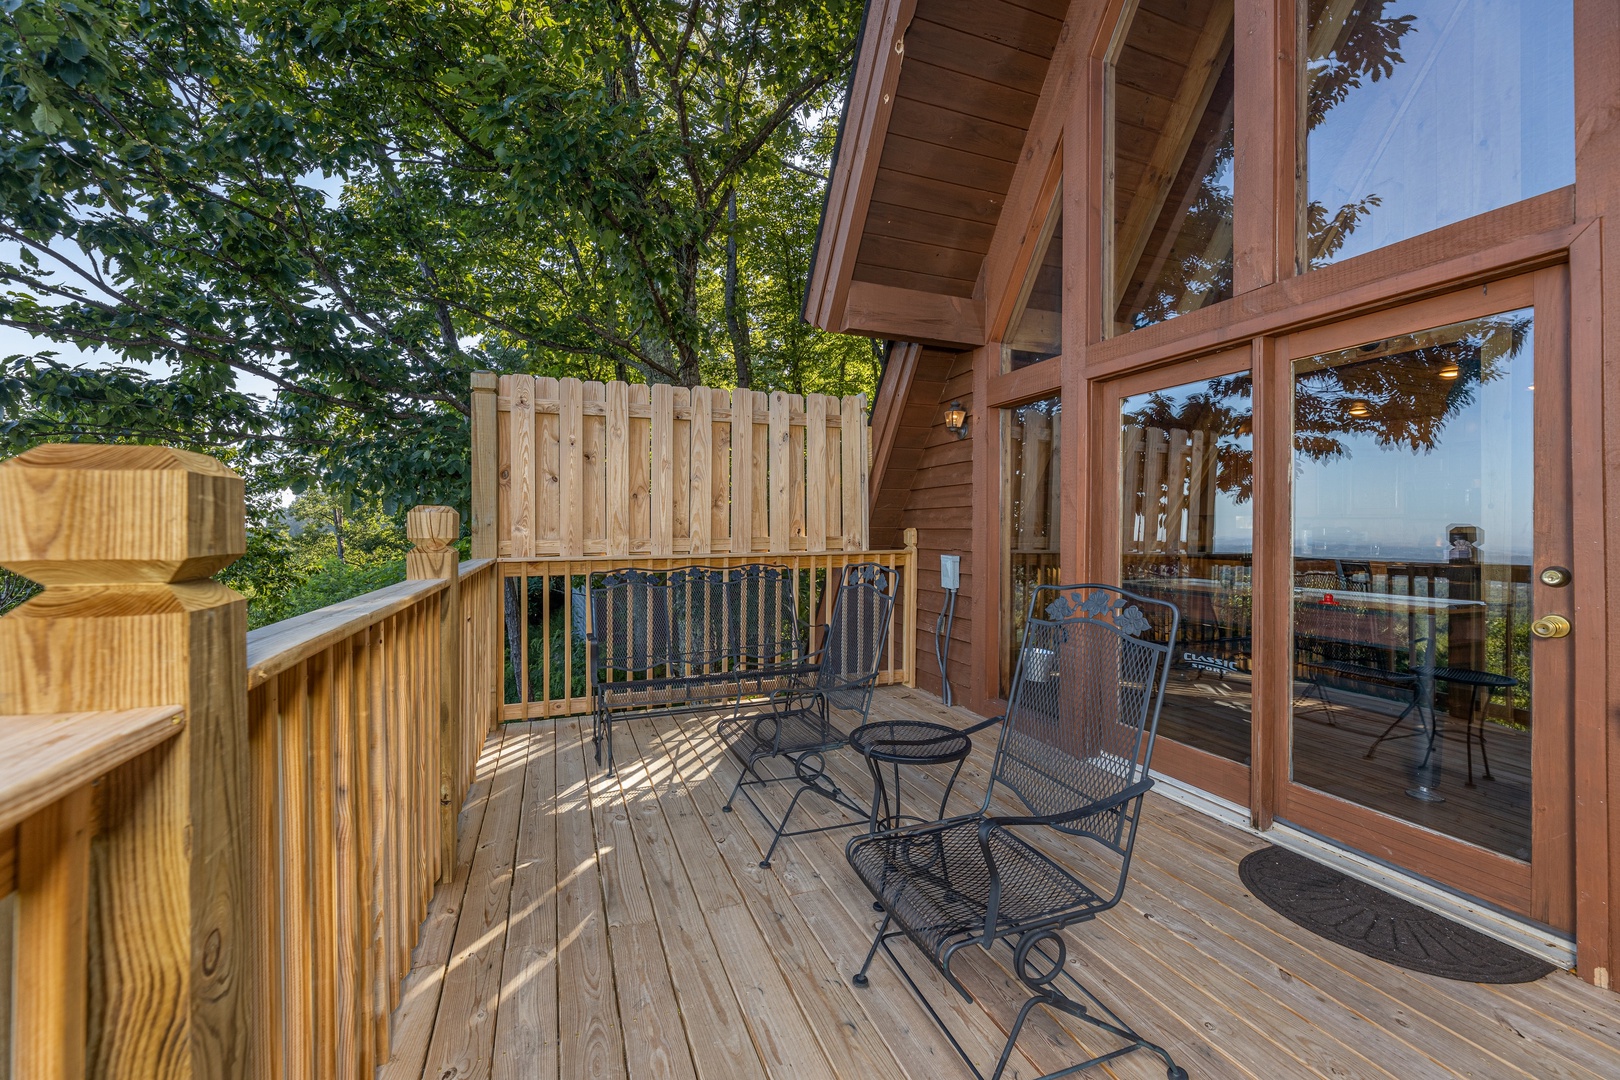 Deck seating at Cozy Mountain View, a 1 bedroom cabin rental located in Pigeon Forge